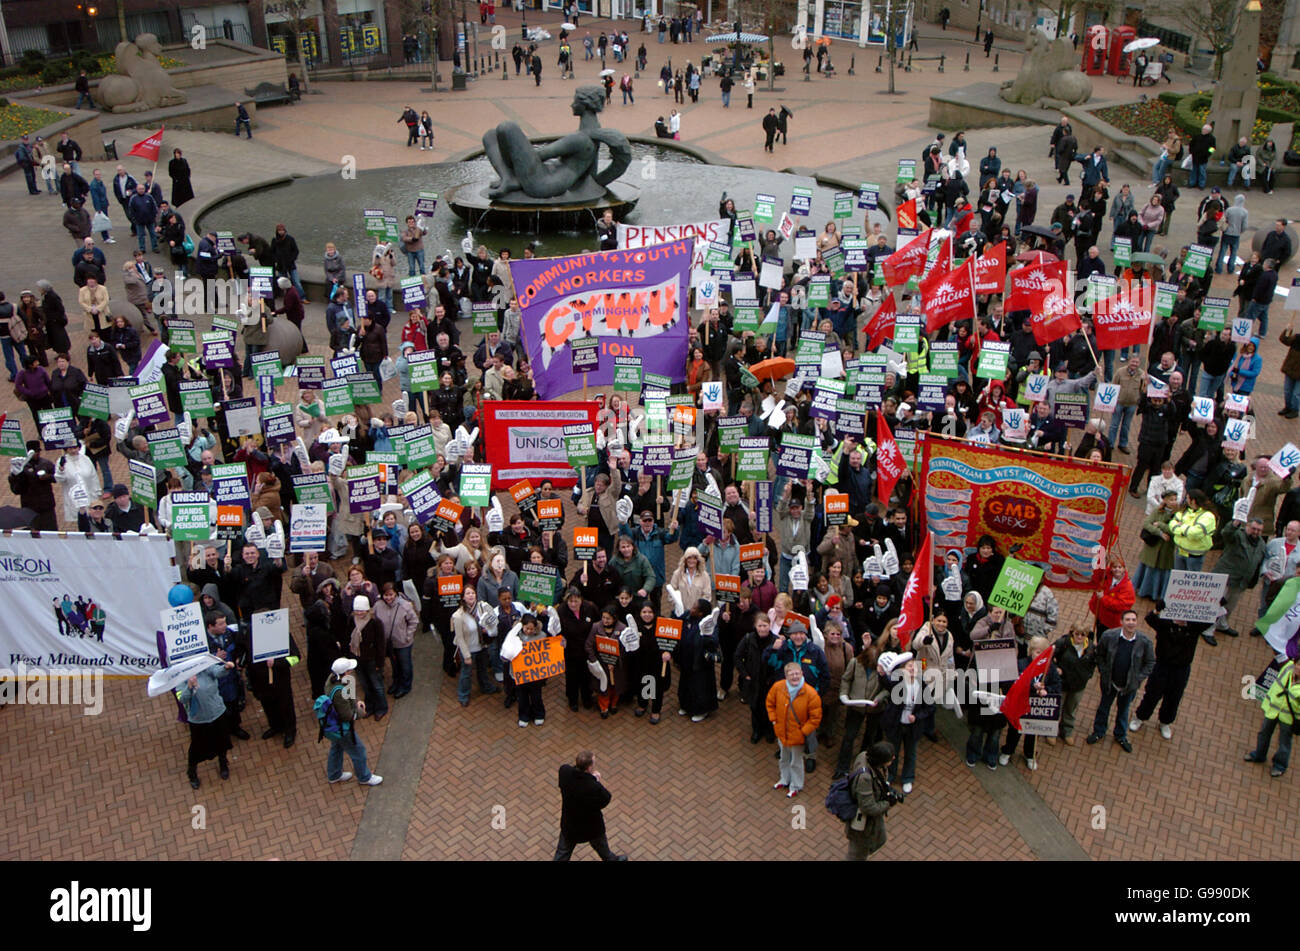 Council and public sector workers on strike in Victoria Square, Birmingham, Tuesday March 28, 2006. The UK was hit by a walkout today of up to 1.5 million council workers in a row over pensions, the biggest stoppage since the 1926 General Strike. See PA story INDUSTRY Strike. PRESS ASSOCIATION photo. Photo credit should read: David Jones/PA Stock Photo